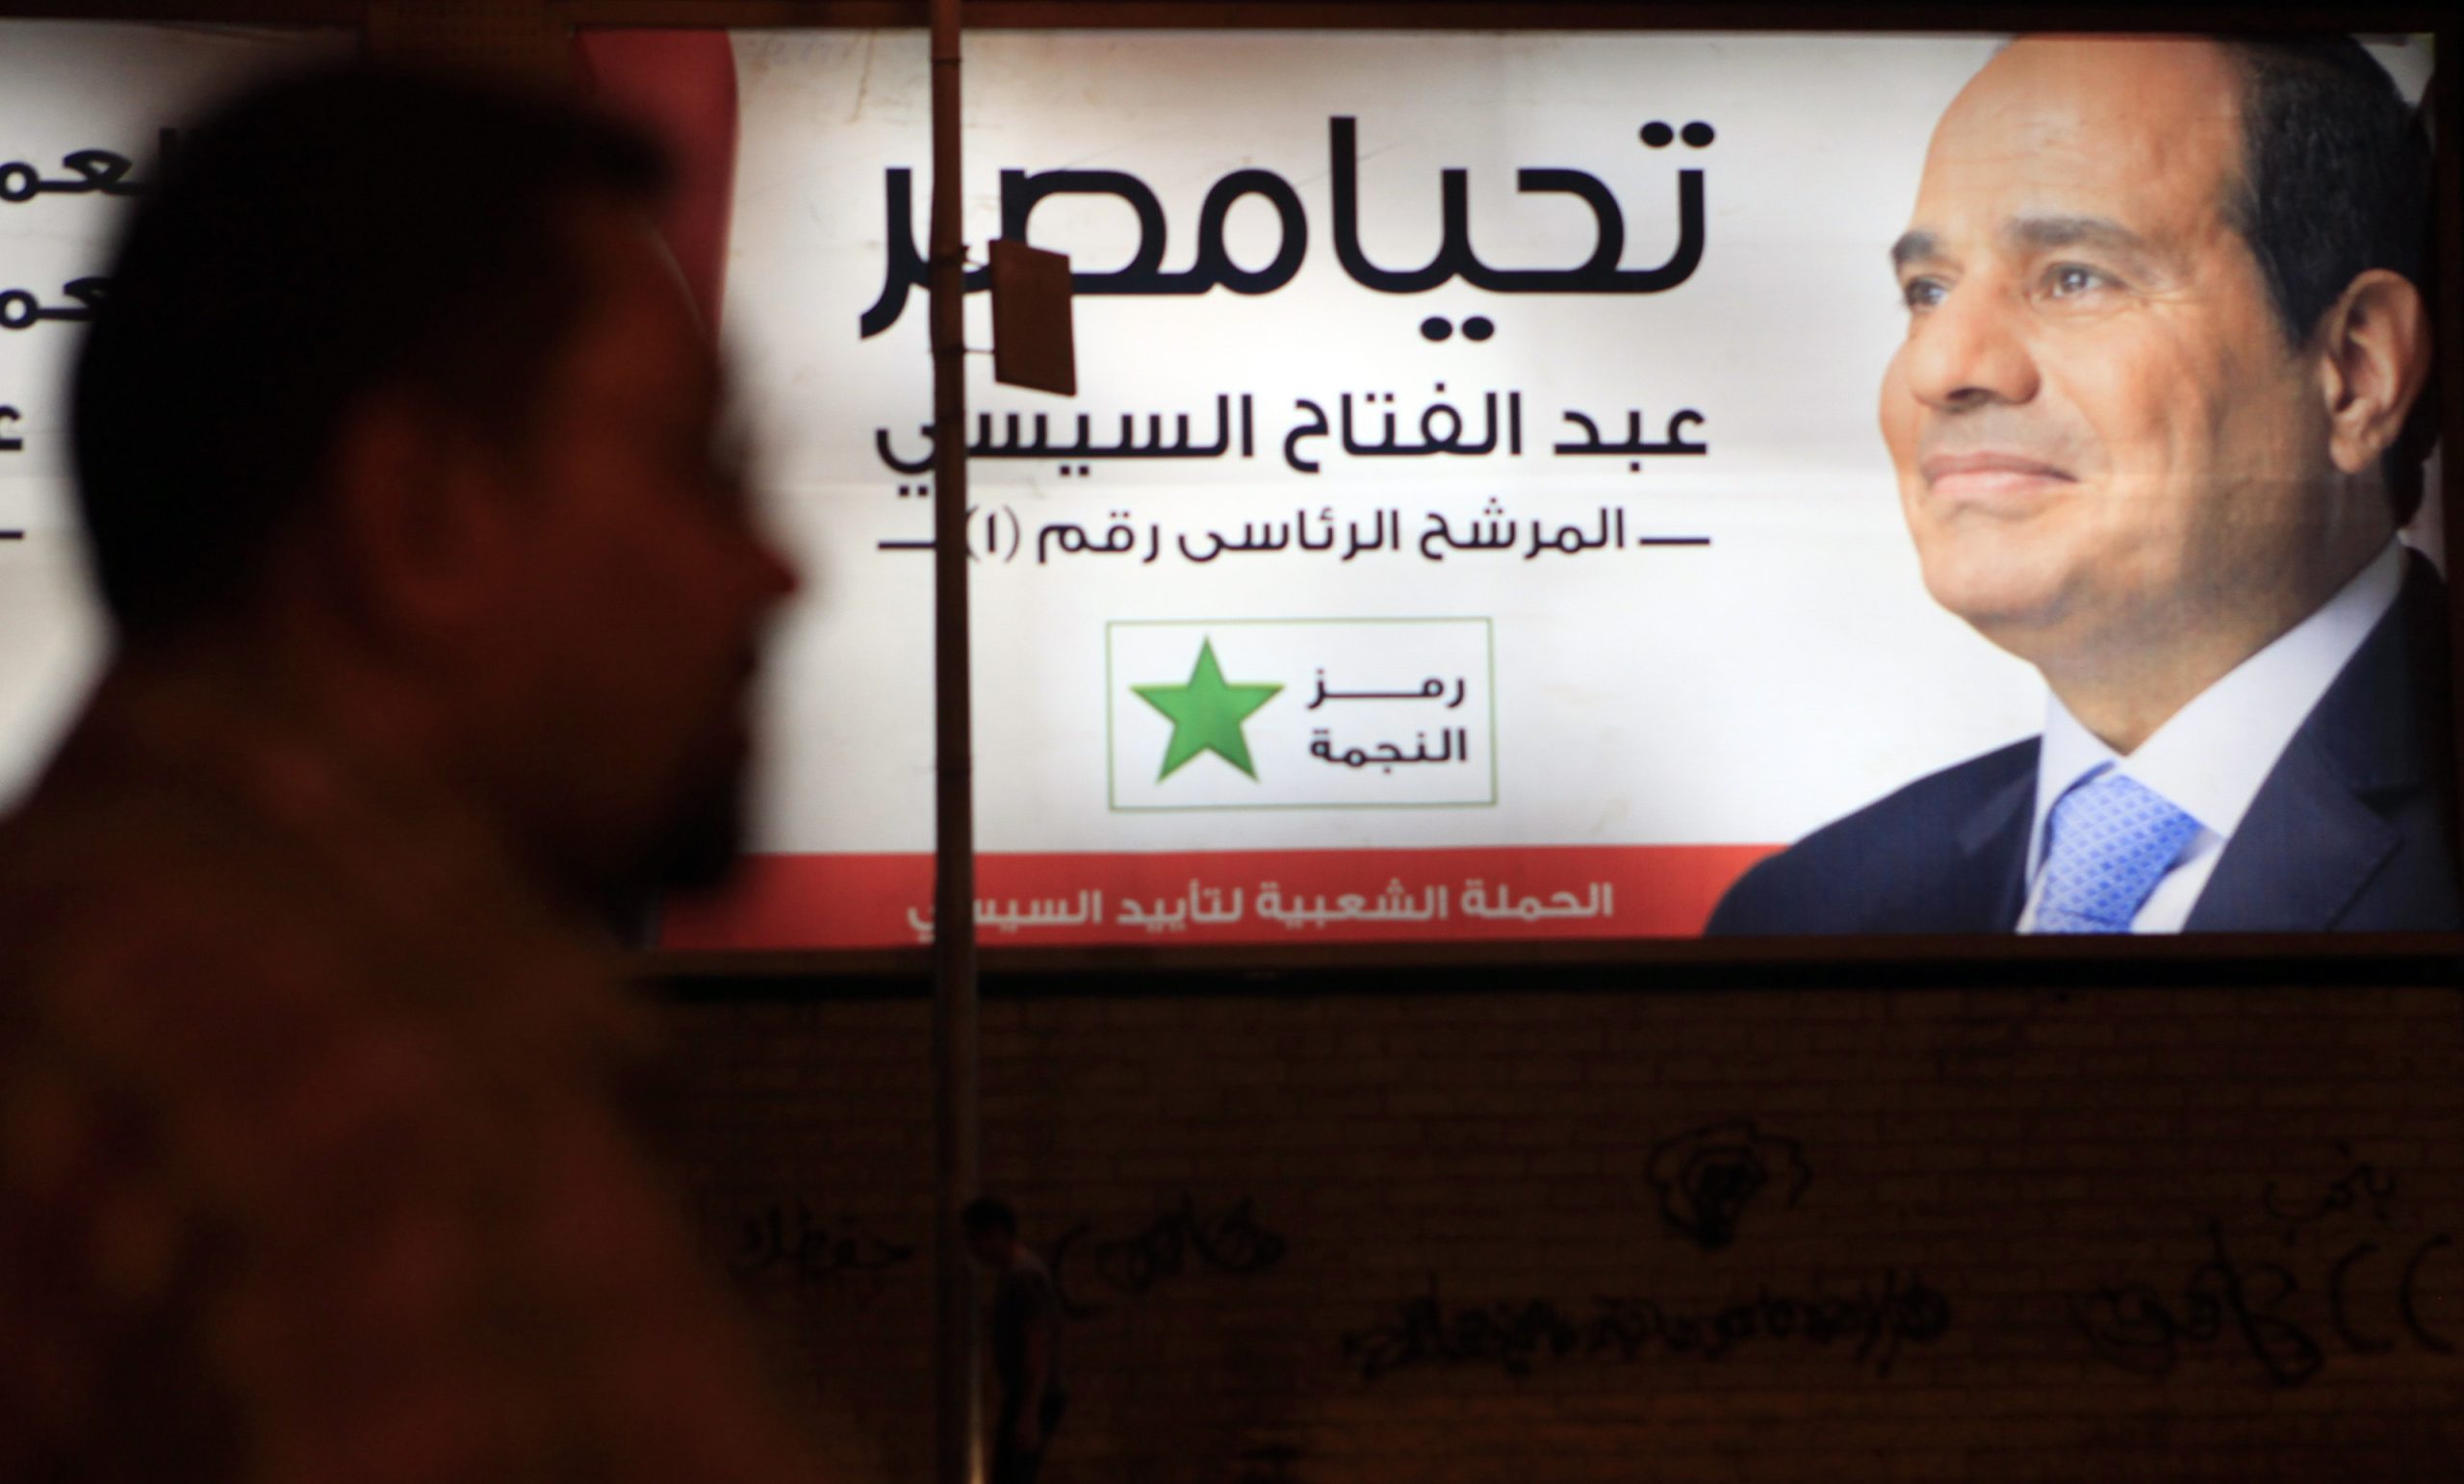 A campaign billboard of former field marshall and current president Abdel Fattah al-Sisi during Egypt's presidential elections of 2014. Words on the billboard read ‘Long live Egypt’, Cairo, 6 May 2014. REUTERS/Amr Abdallah Dalsh.